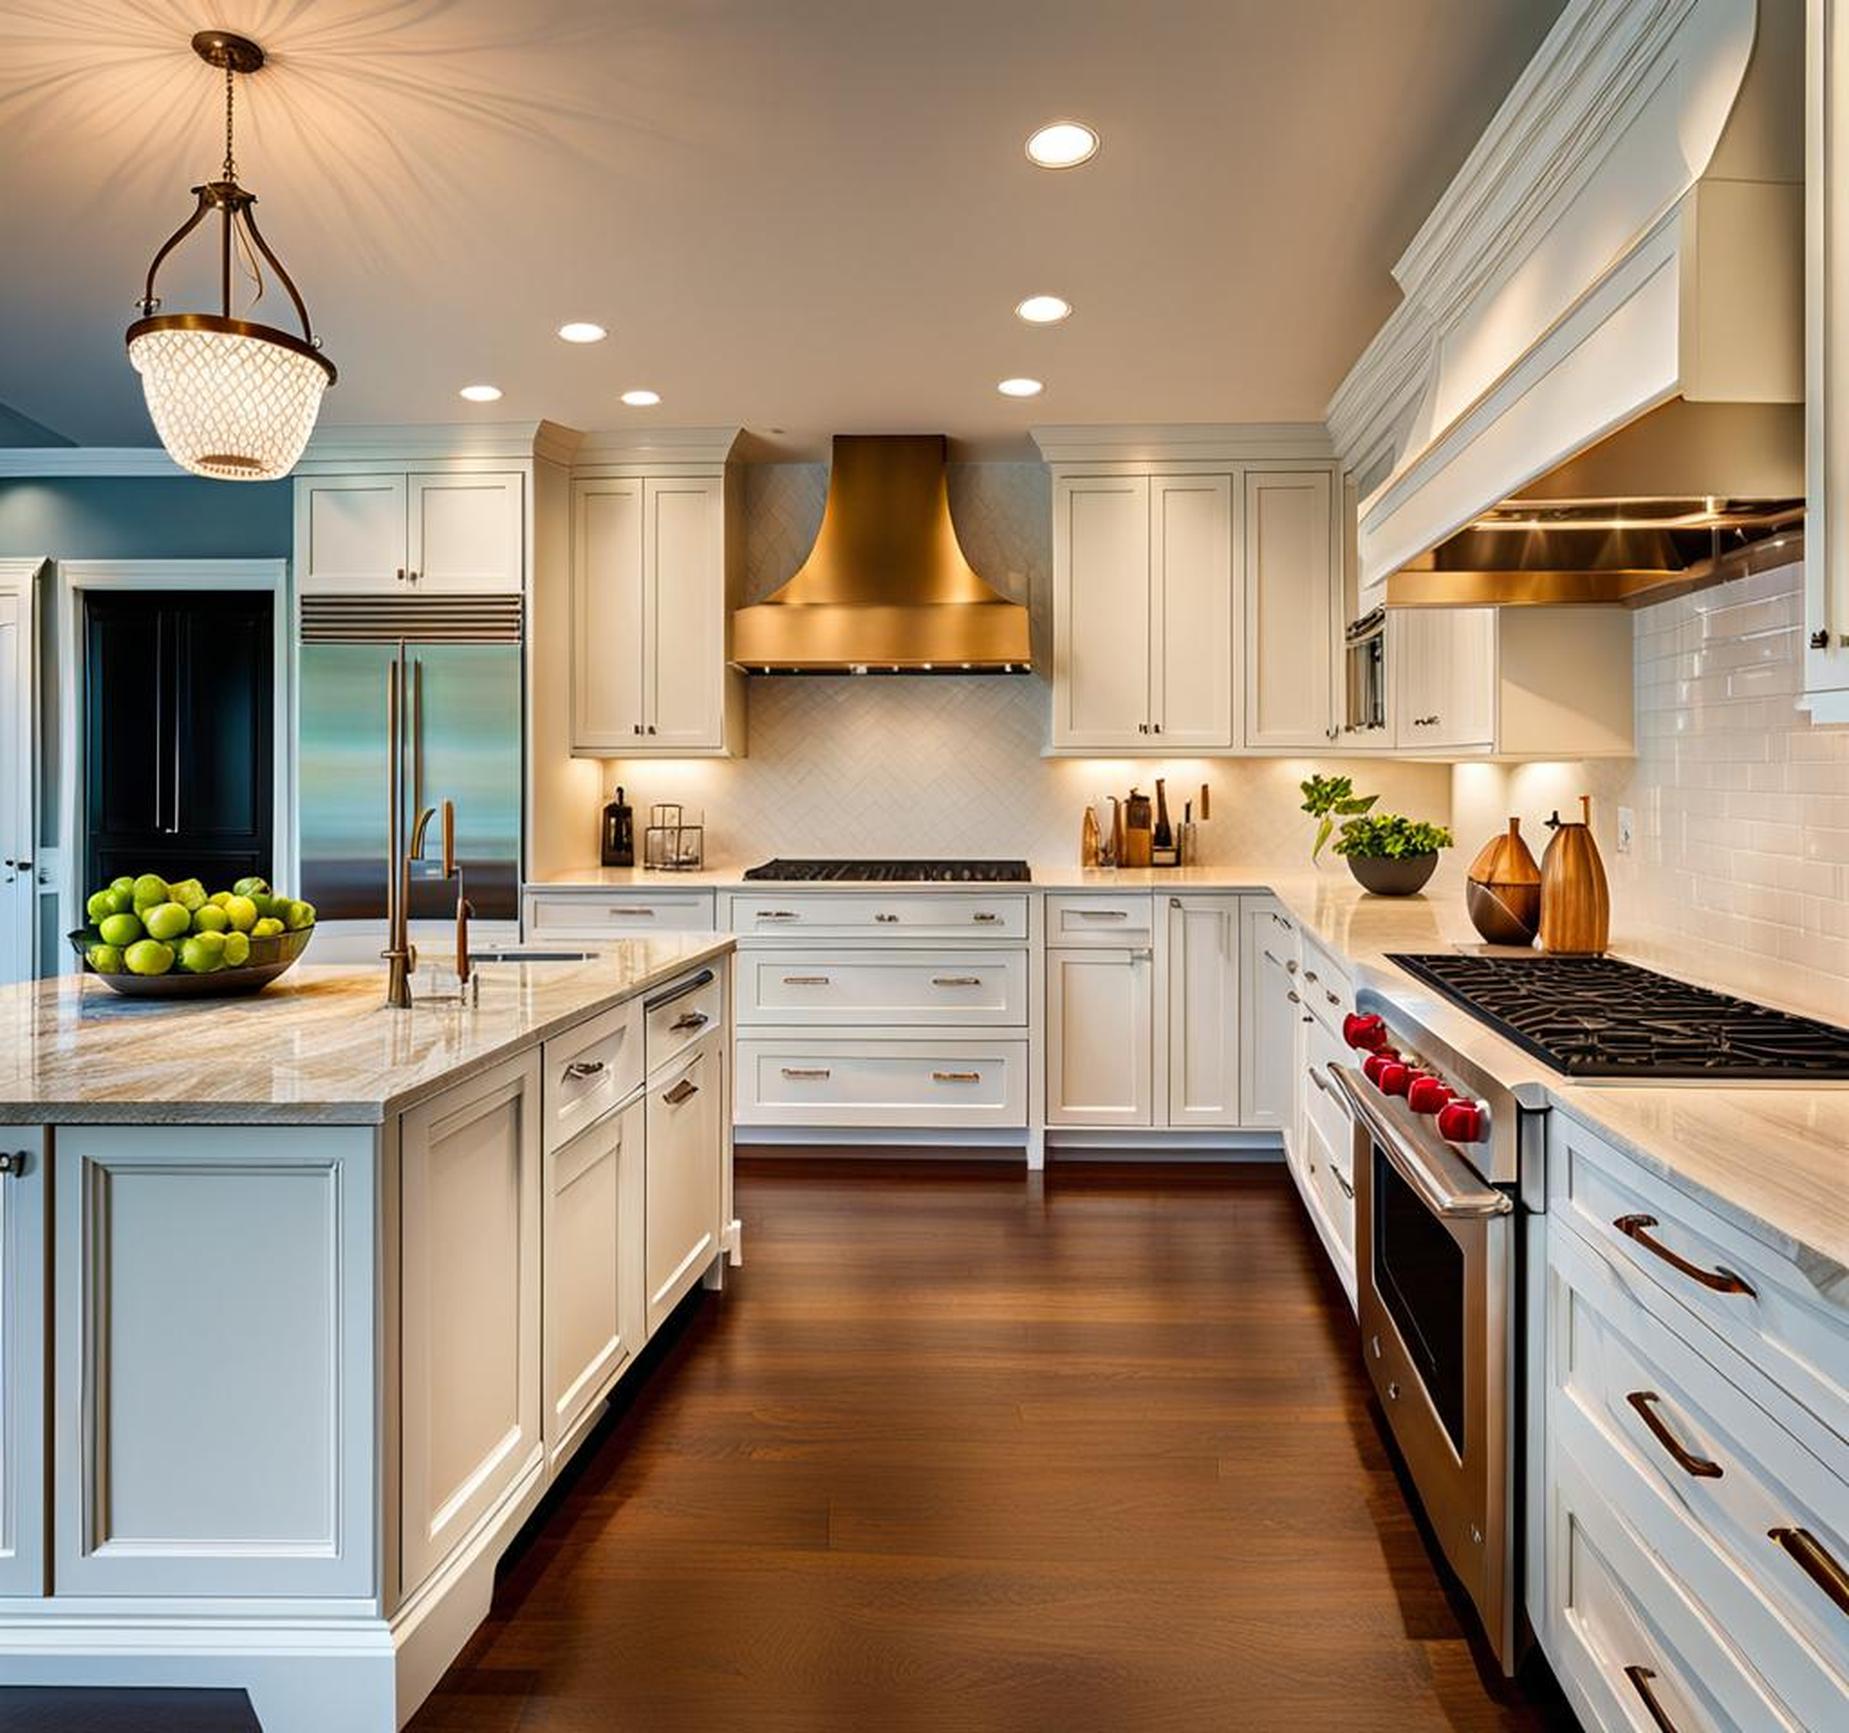 pros and cons of refacing kitchen cabinets